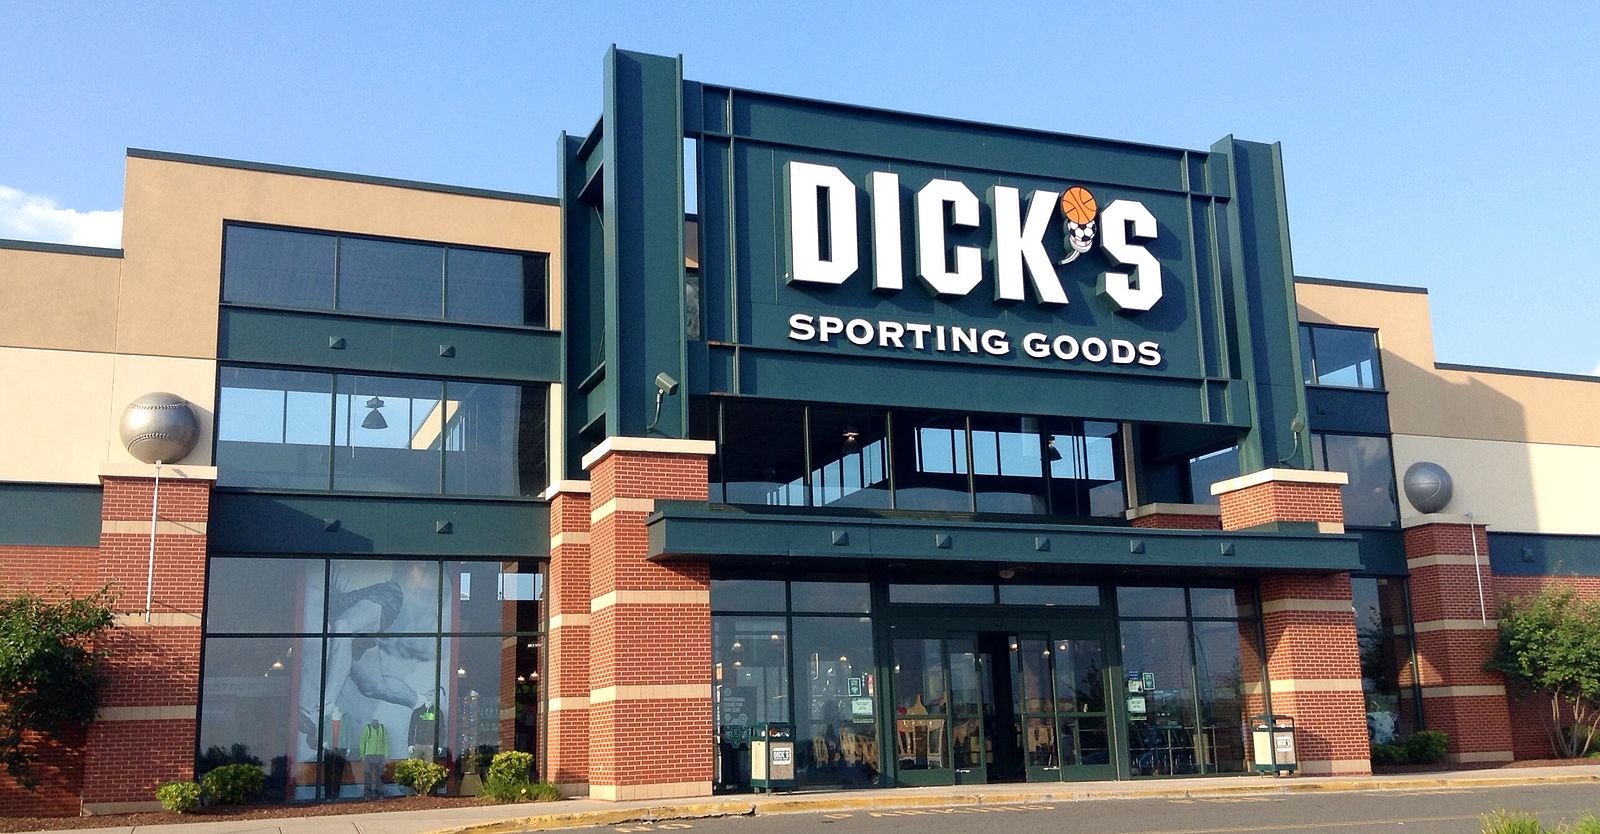 New sporting goods store opens in Pace (PHOTOS)